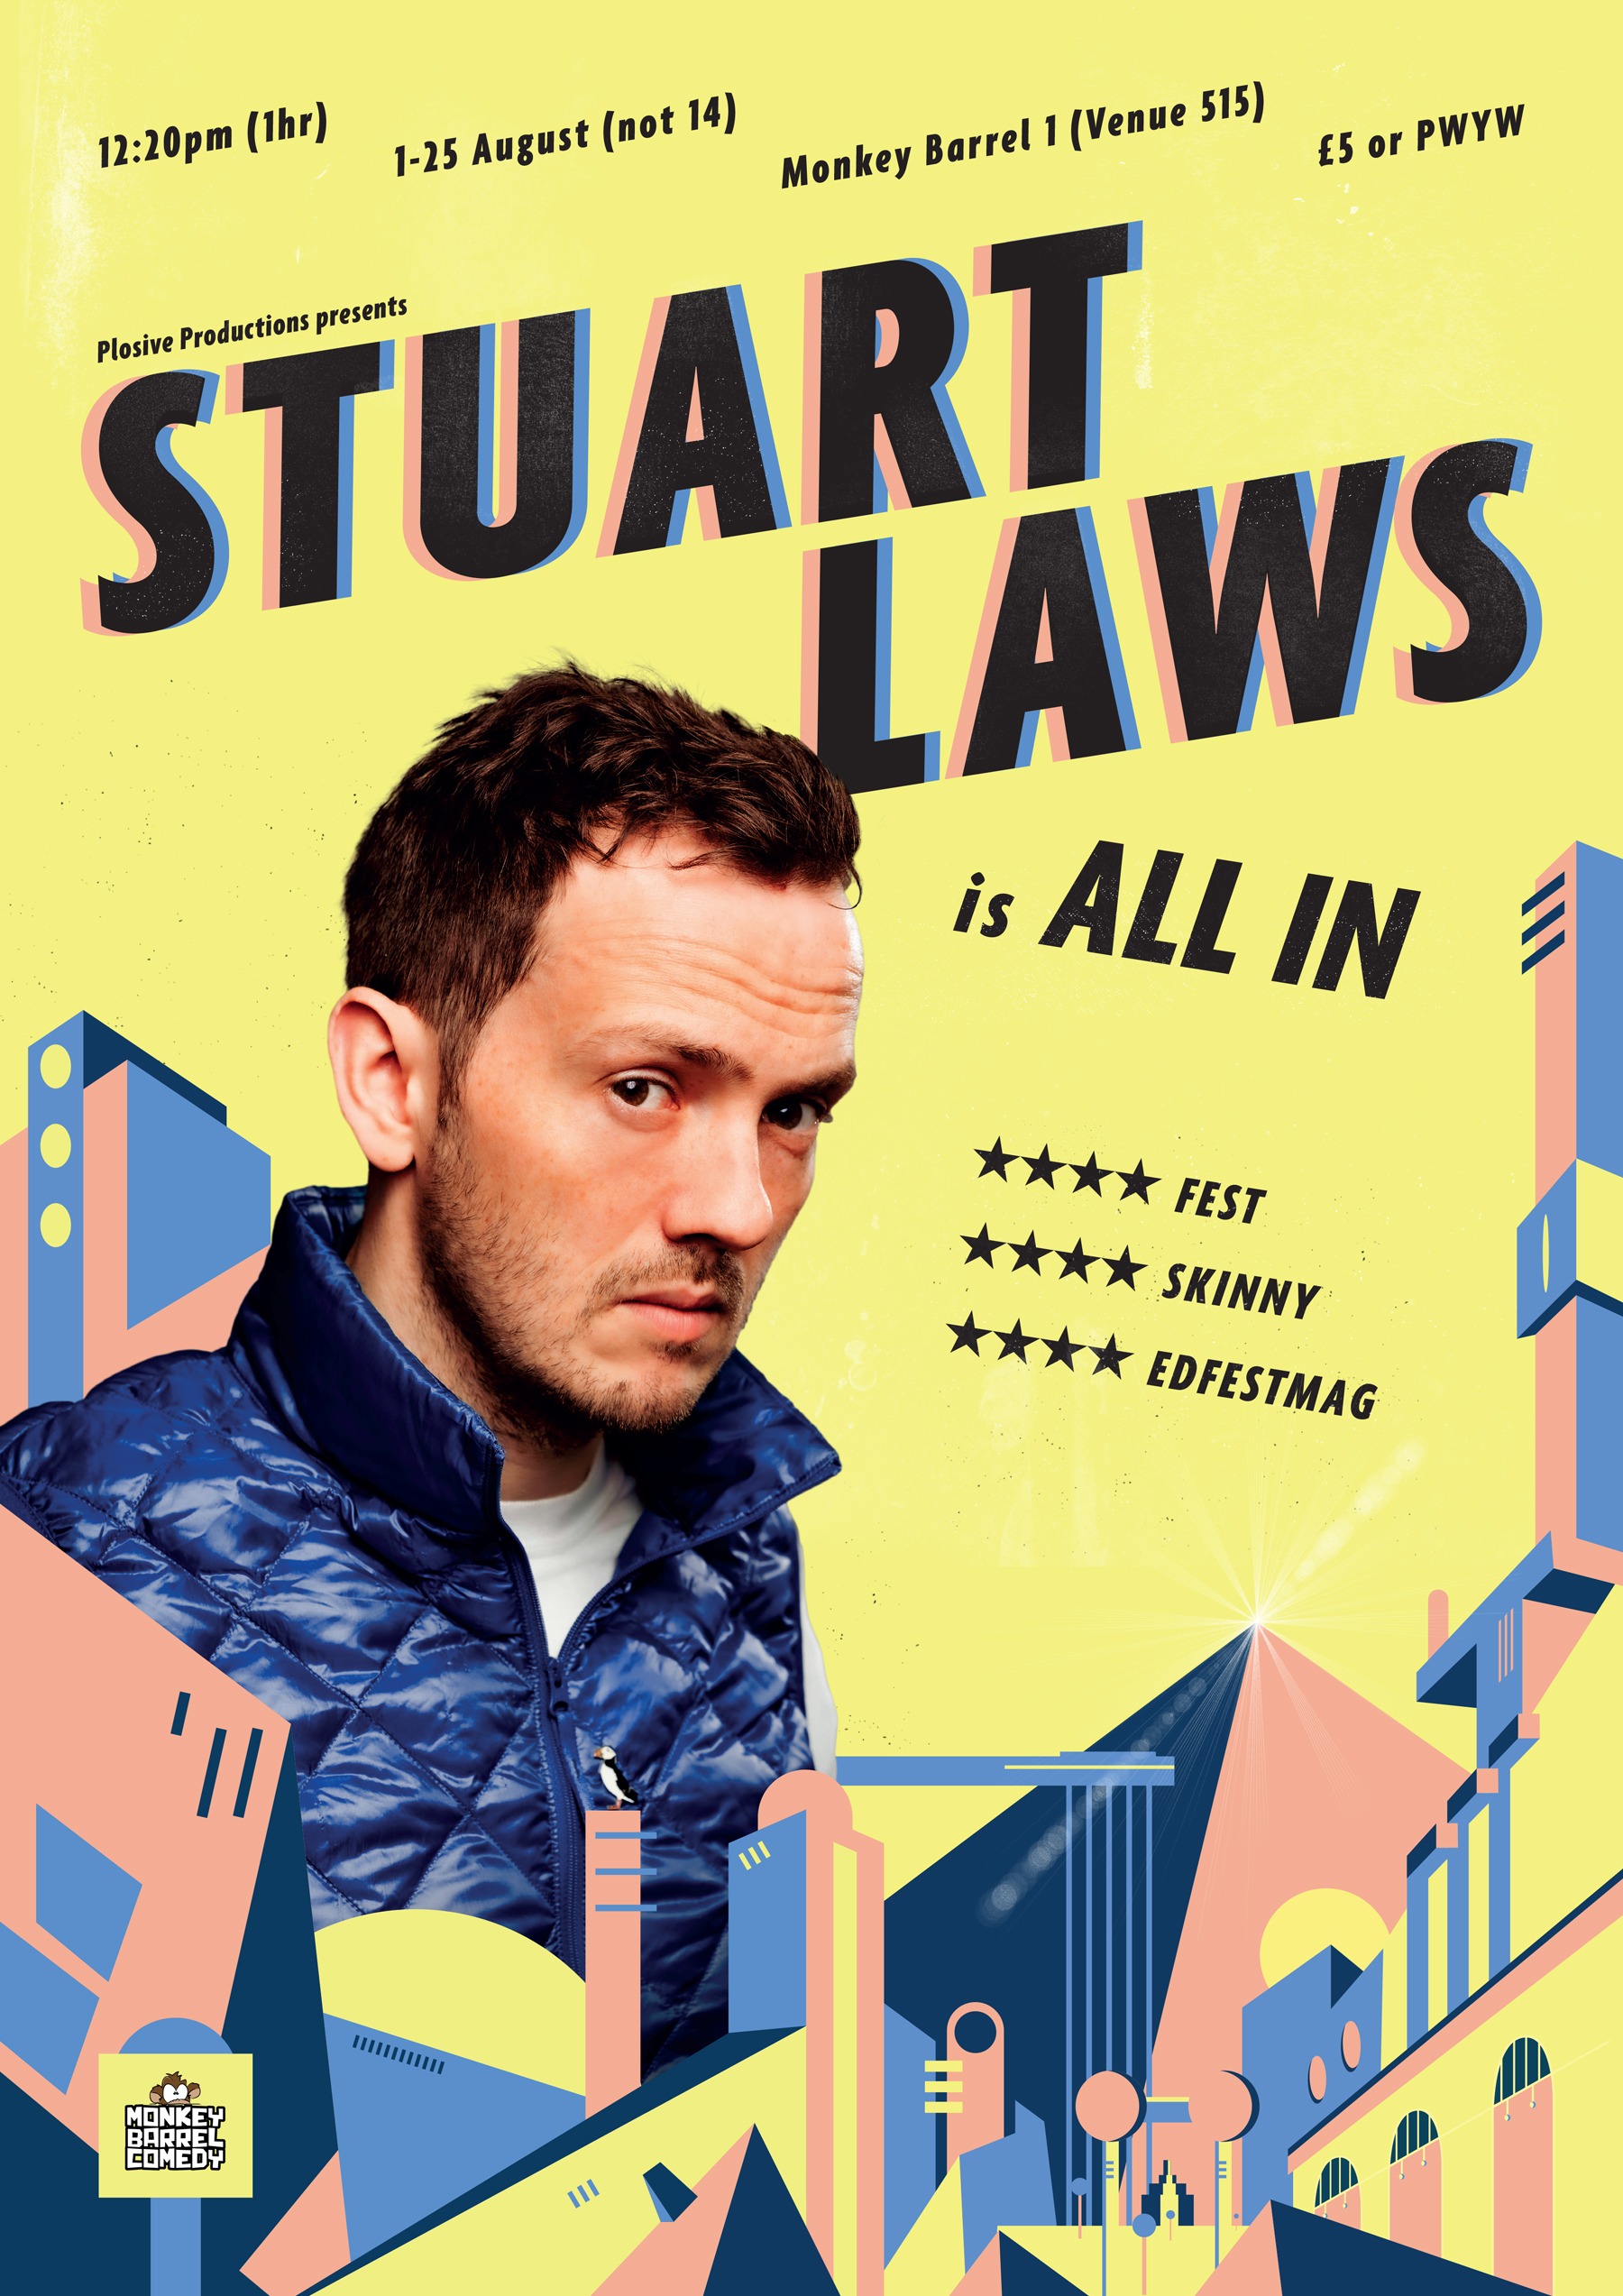 The poster for Stuart Laws Is All In